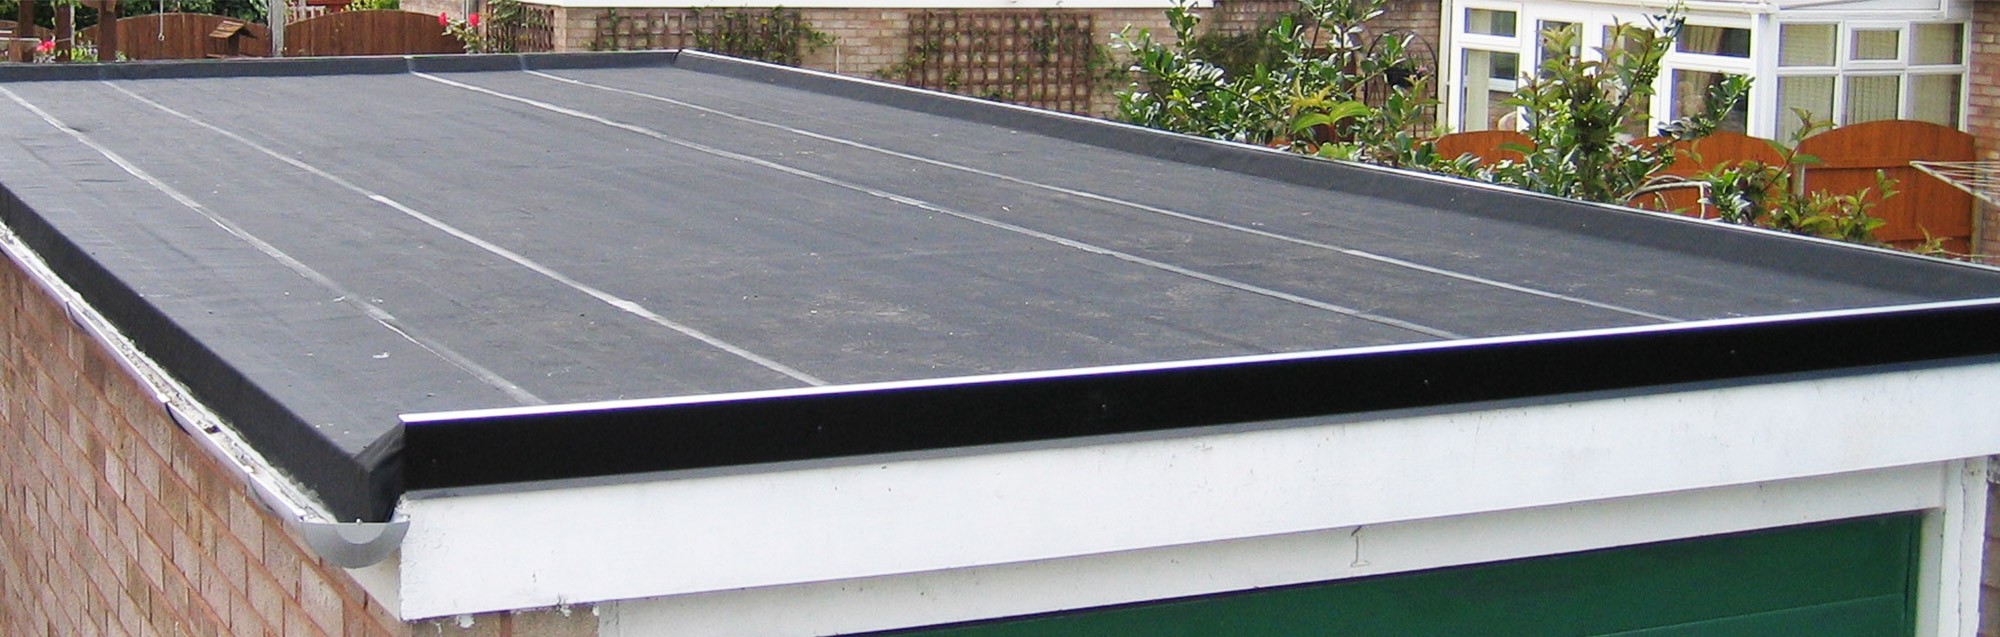 EPDM roofing in Kingston upon Thames